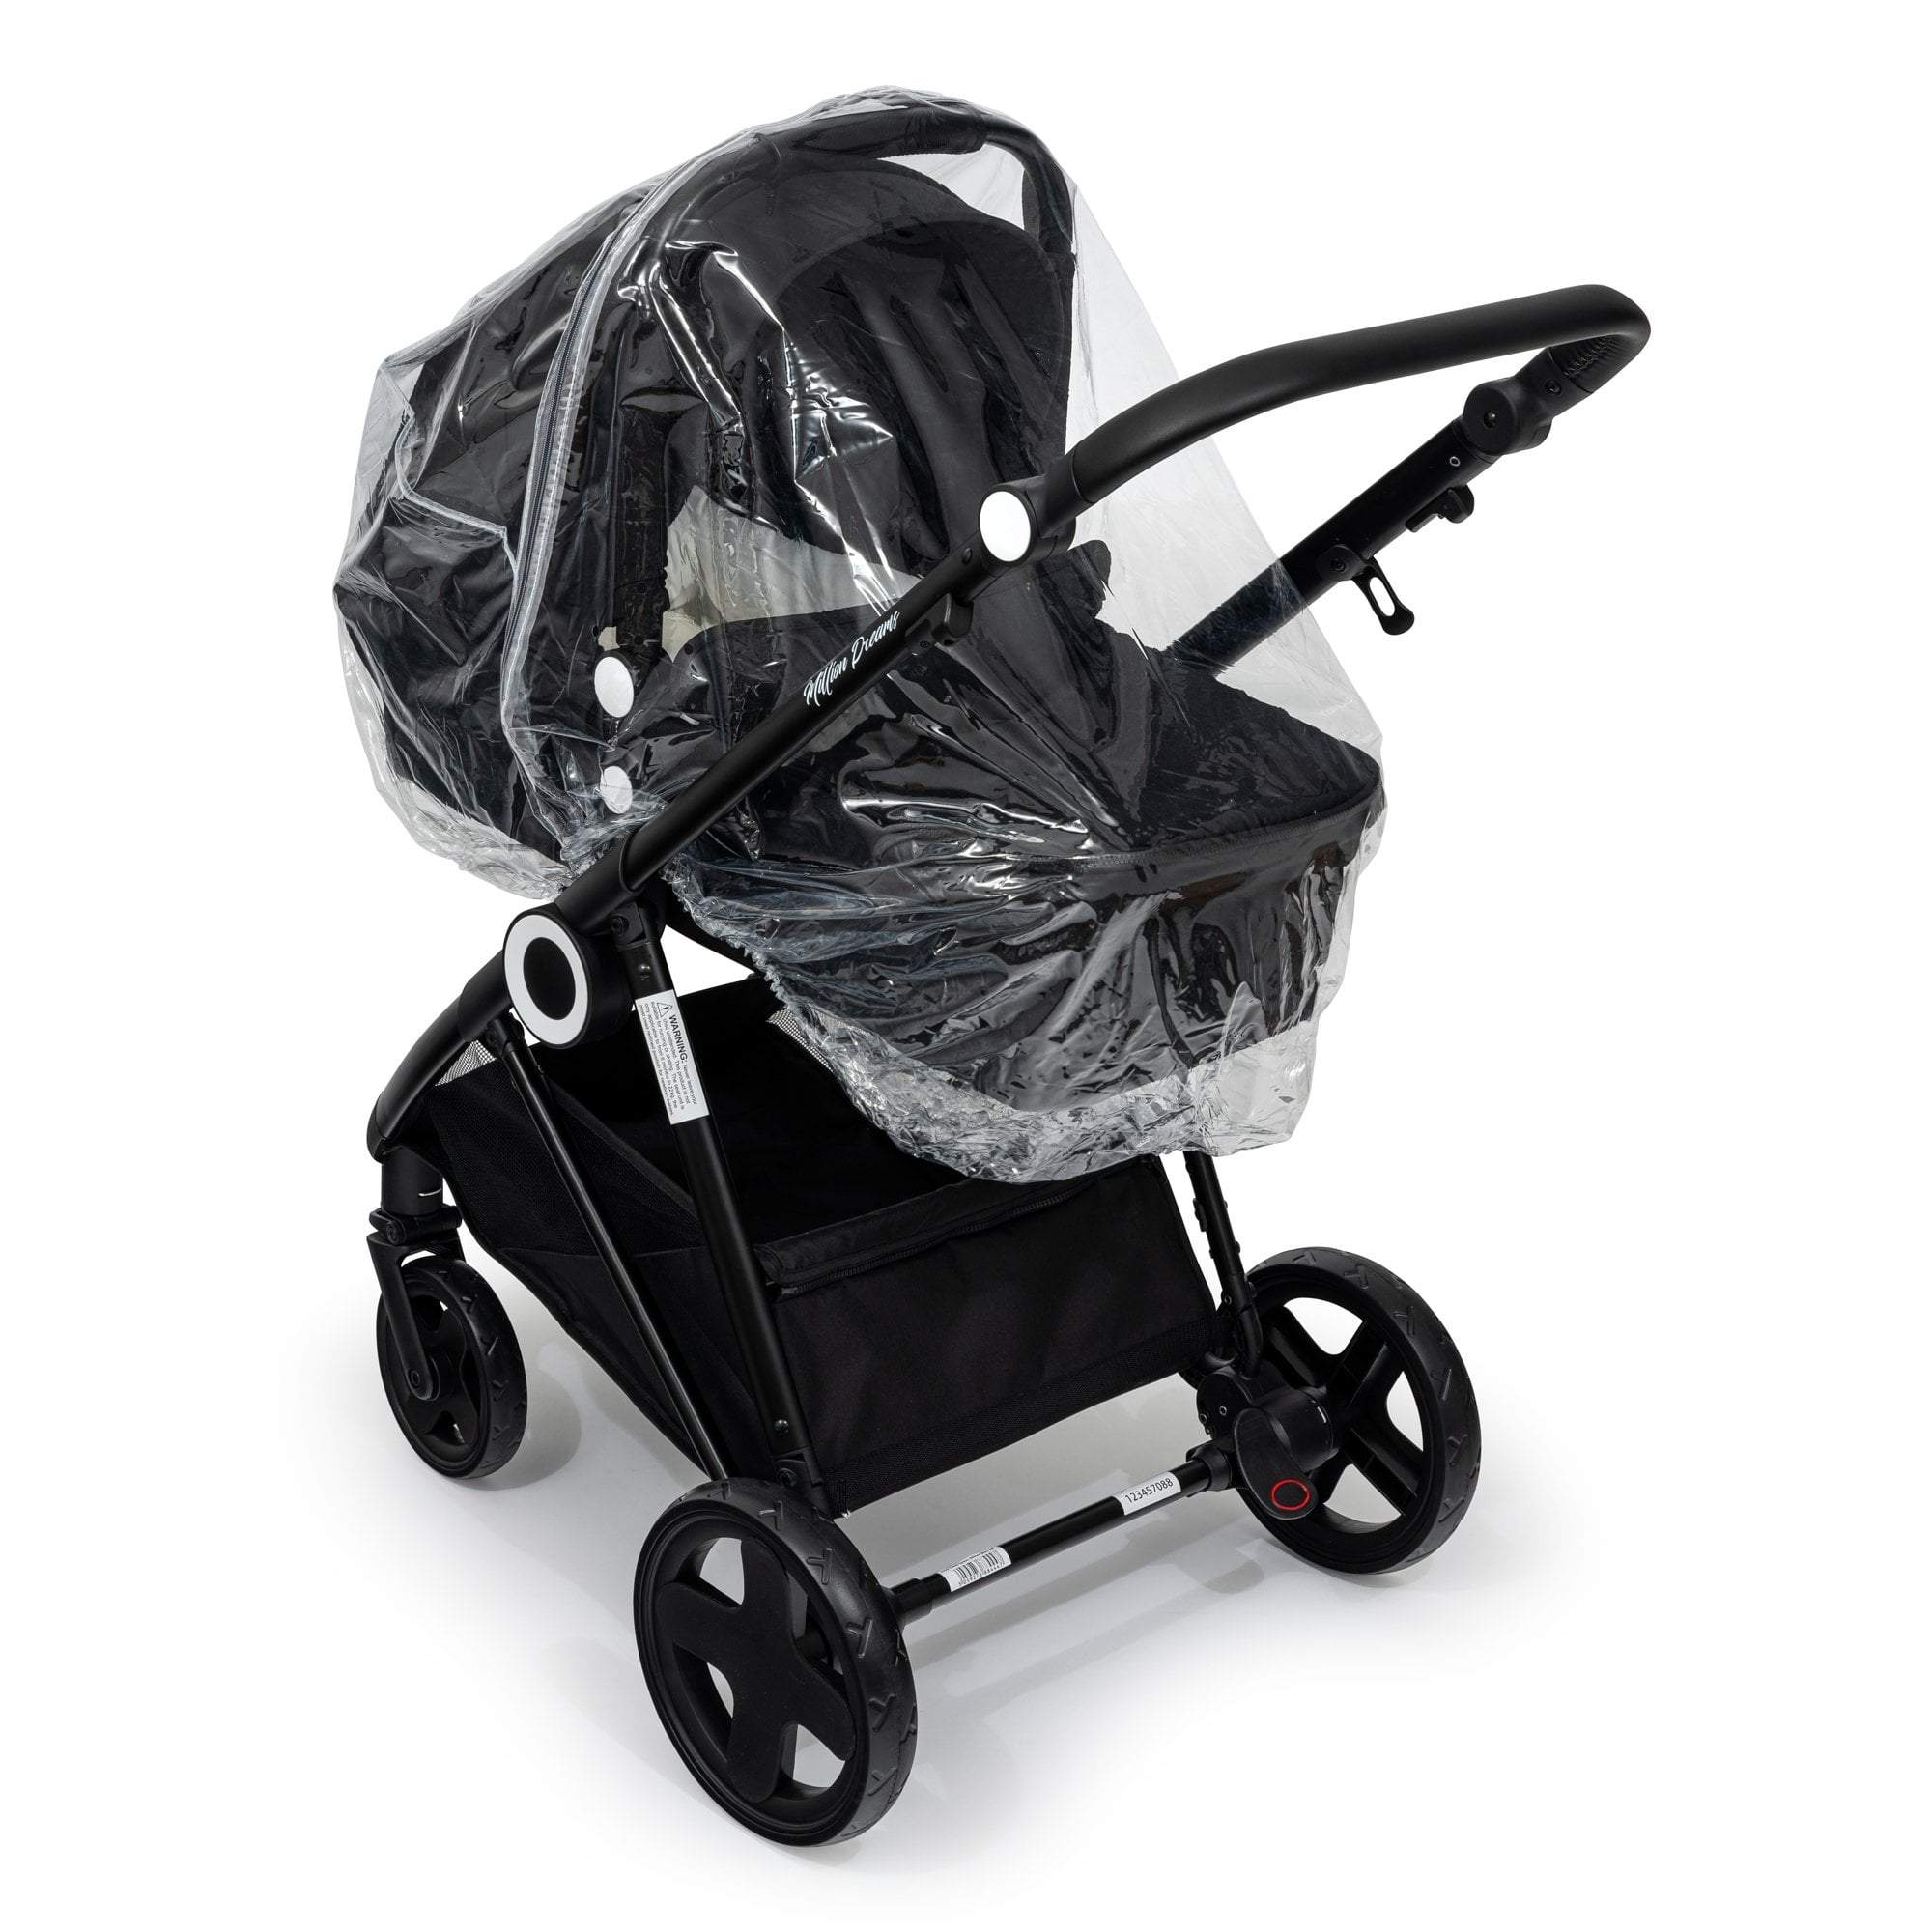 Carrycot Raincover Compatible With Maclaren - Fits All Models - For Your Little One